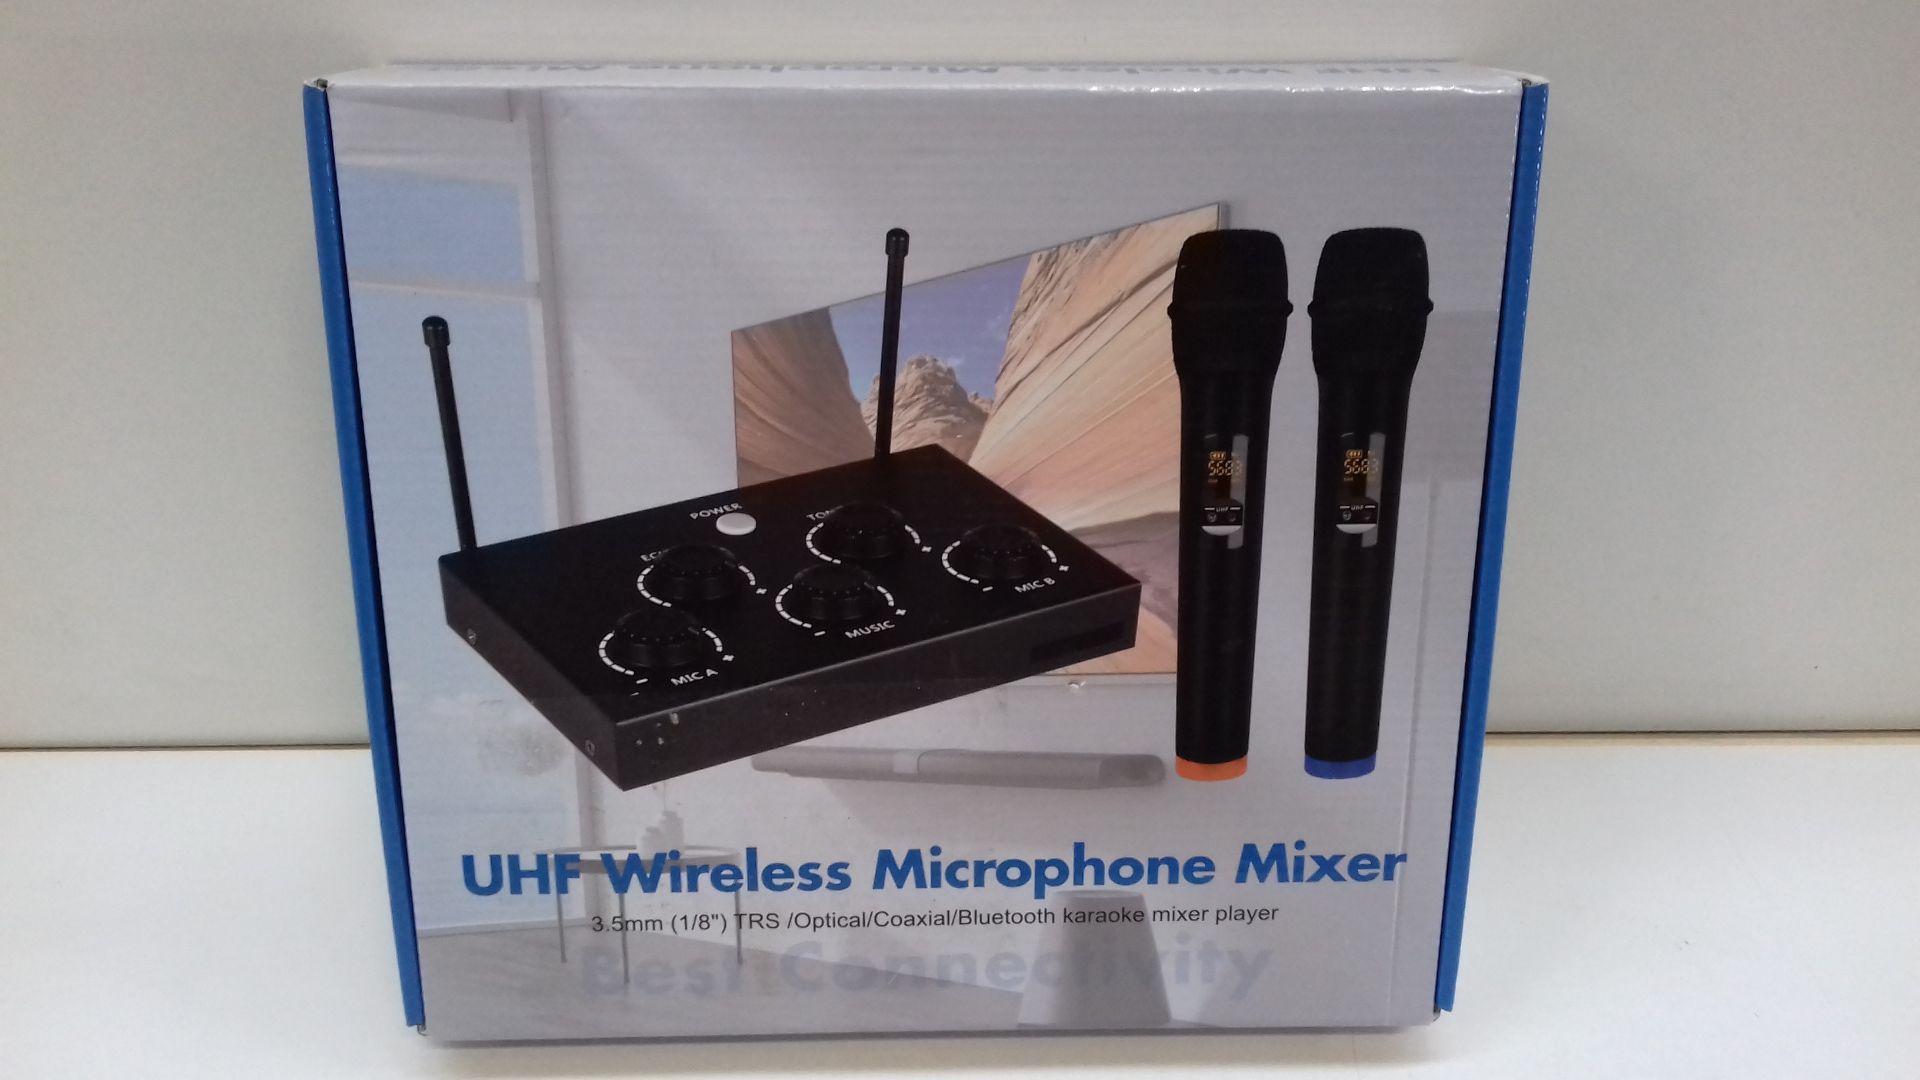 RRP £63.64 Portable Karaoke Microphone Mixer System Set with Dual UHF Wireless Mic - Image 2 of 2